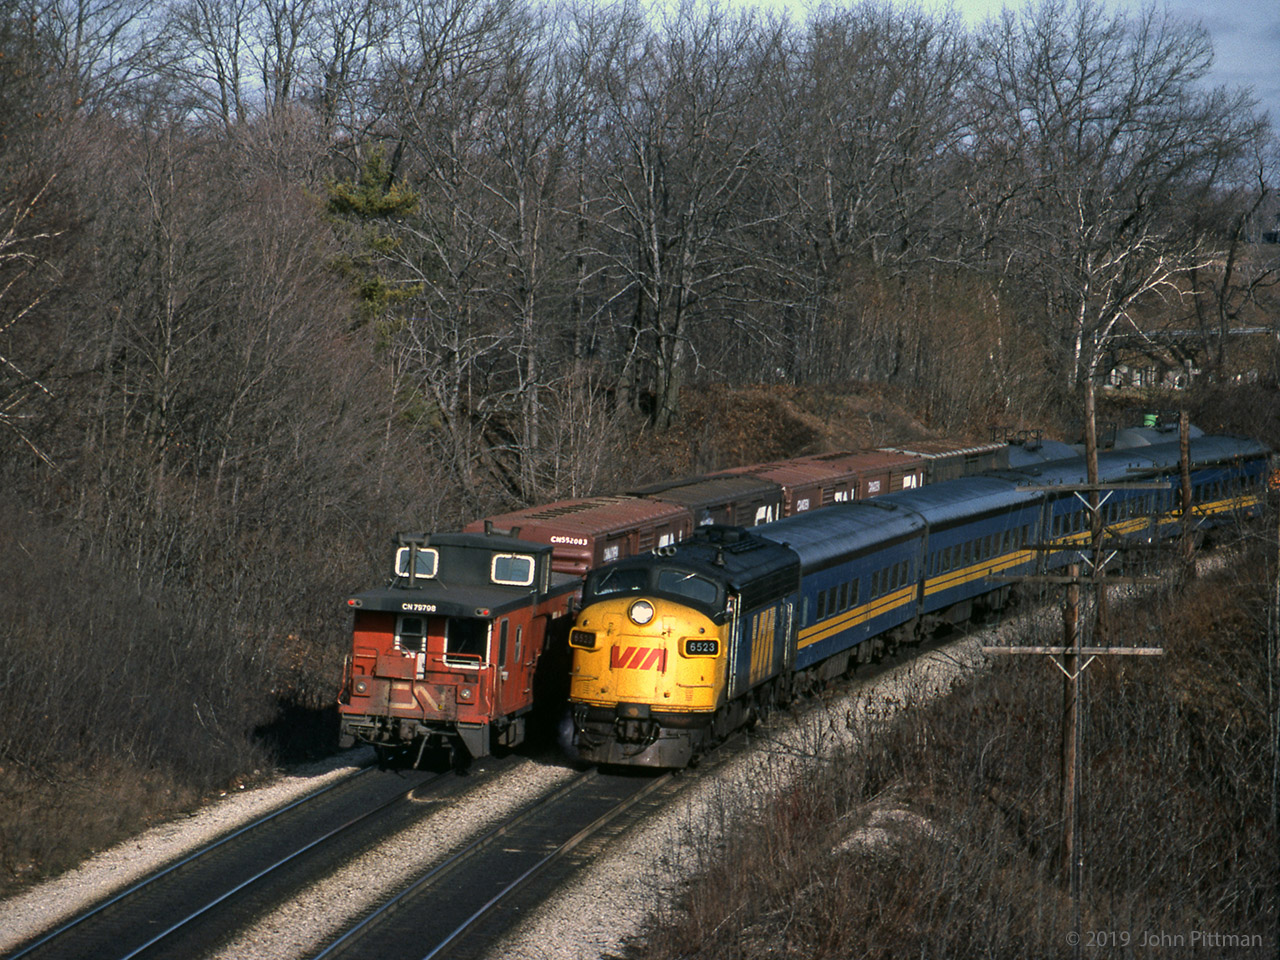 GMD FP9A VIA 6523 leads its train of 4 blue coaches timetable-west on the Oakville Sub south track, approaching CN Bayview (Jct), as seen from Plains Road "Wolfe Island bridge".
It is almost past an eastbound CN freight train on the north track with caboose CN 79798 at the end.
Date written on slide matches Kodachrome Jan 83 process date.